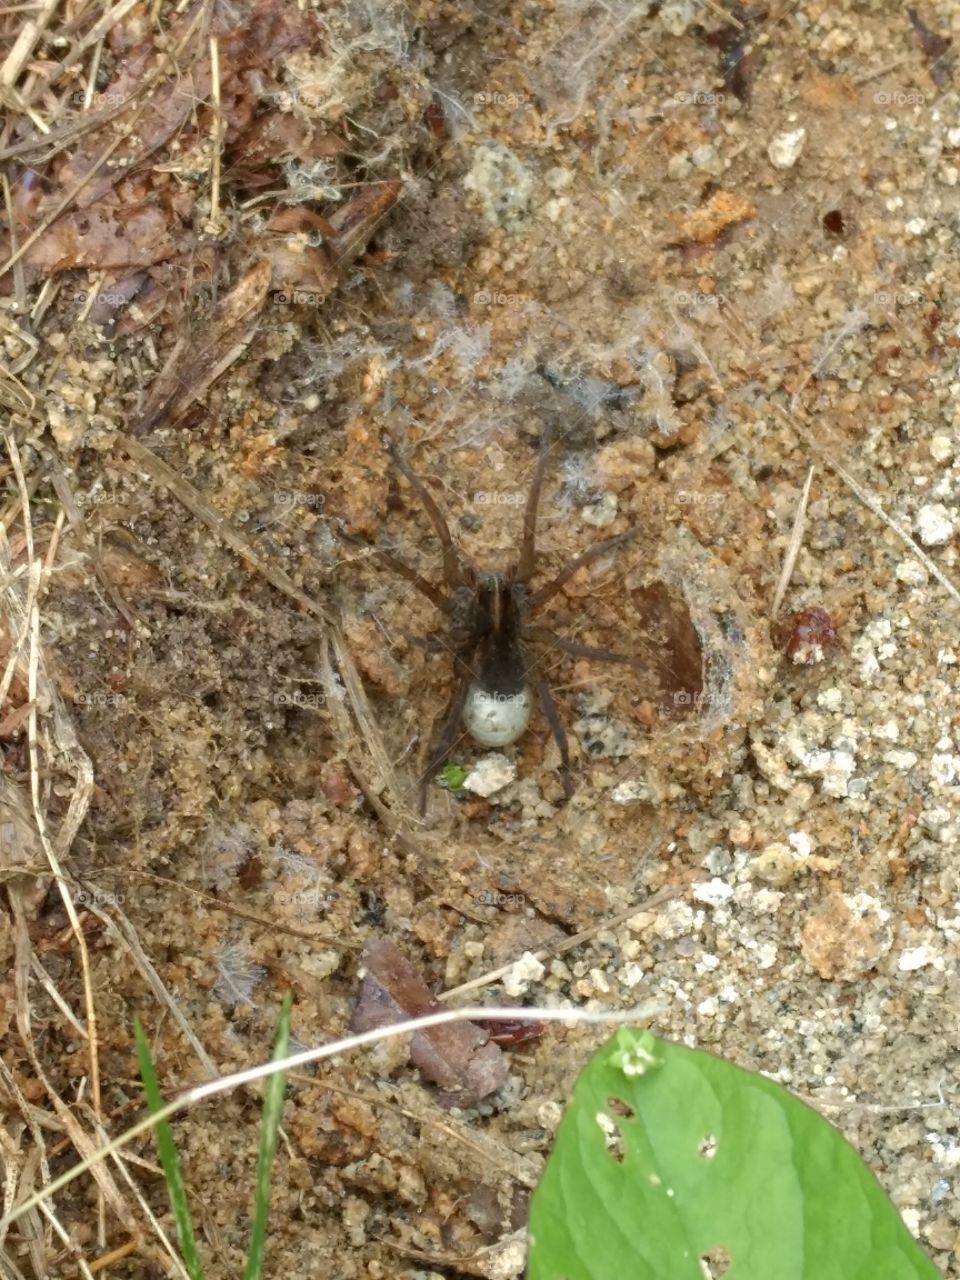 a female spider carrying her egg sac